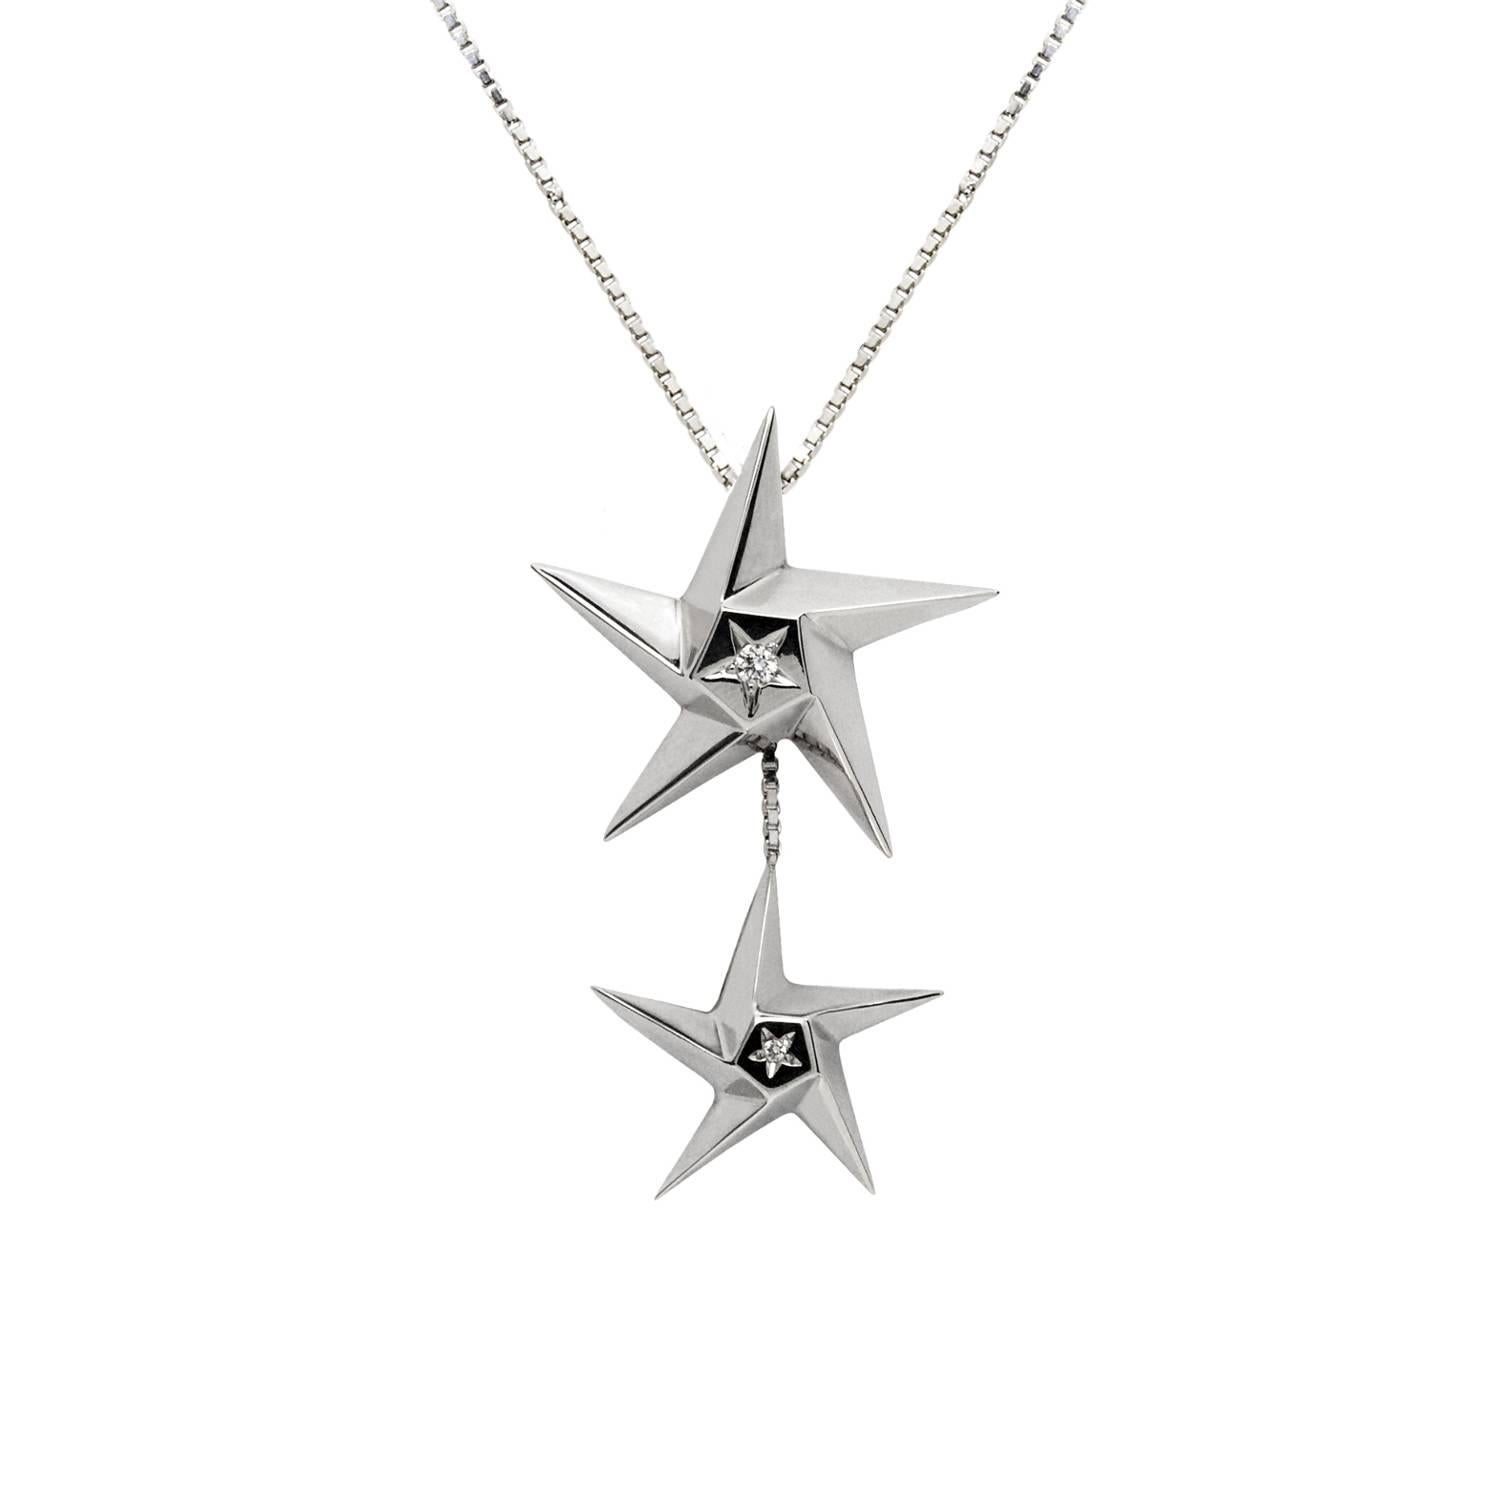 Daou Star Drop Diamond and White Gold Two-Star Graduated Pendant Drop Necklace